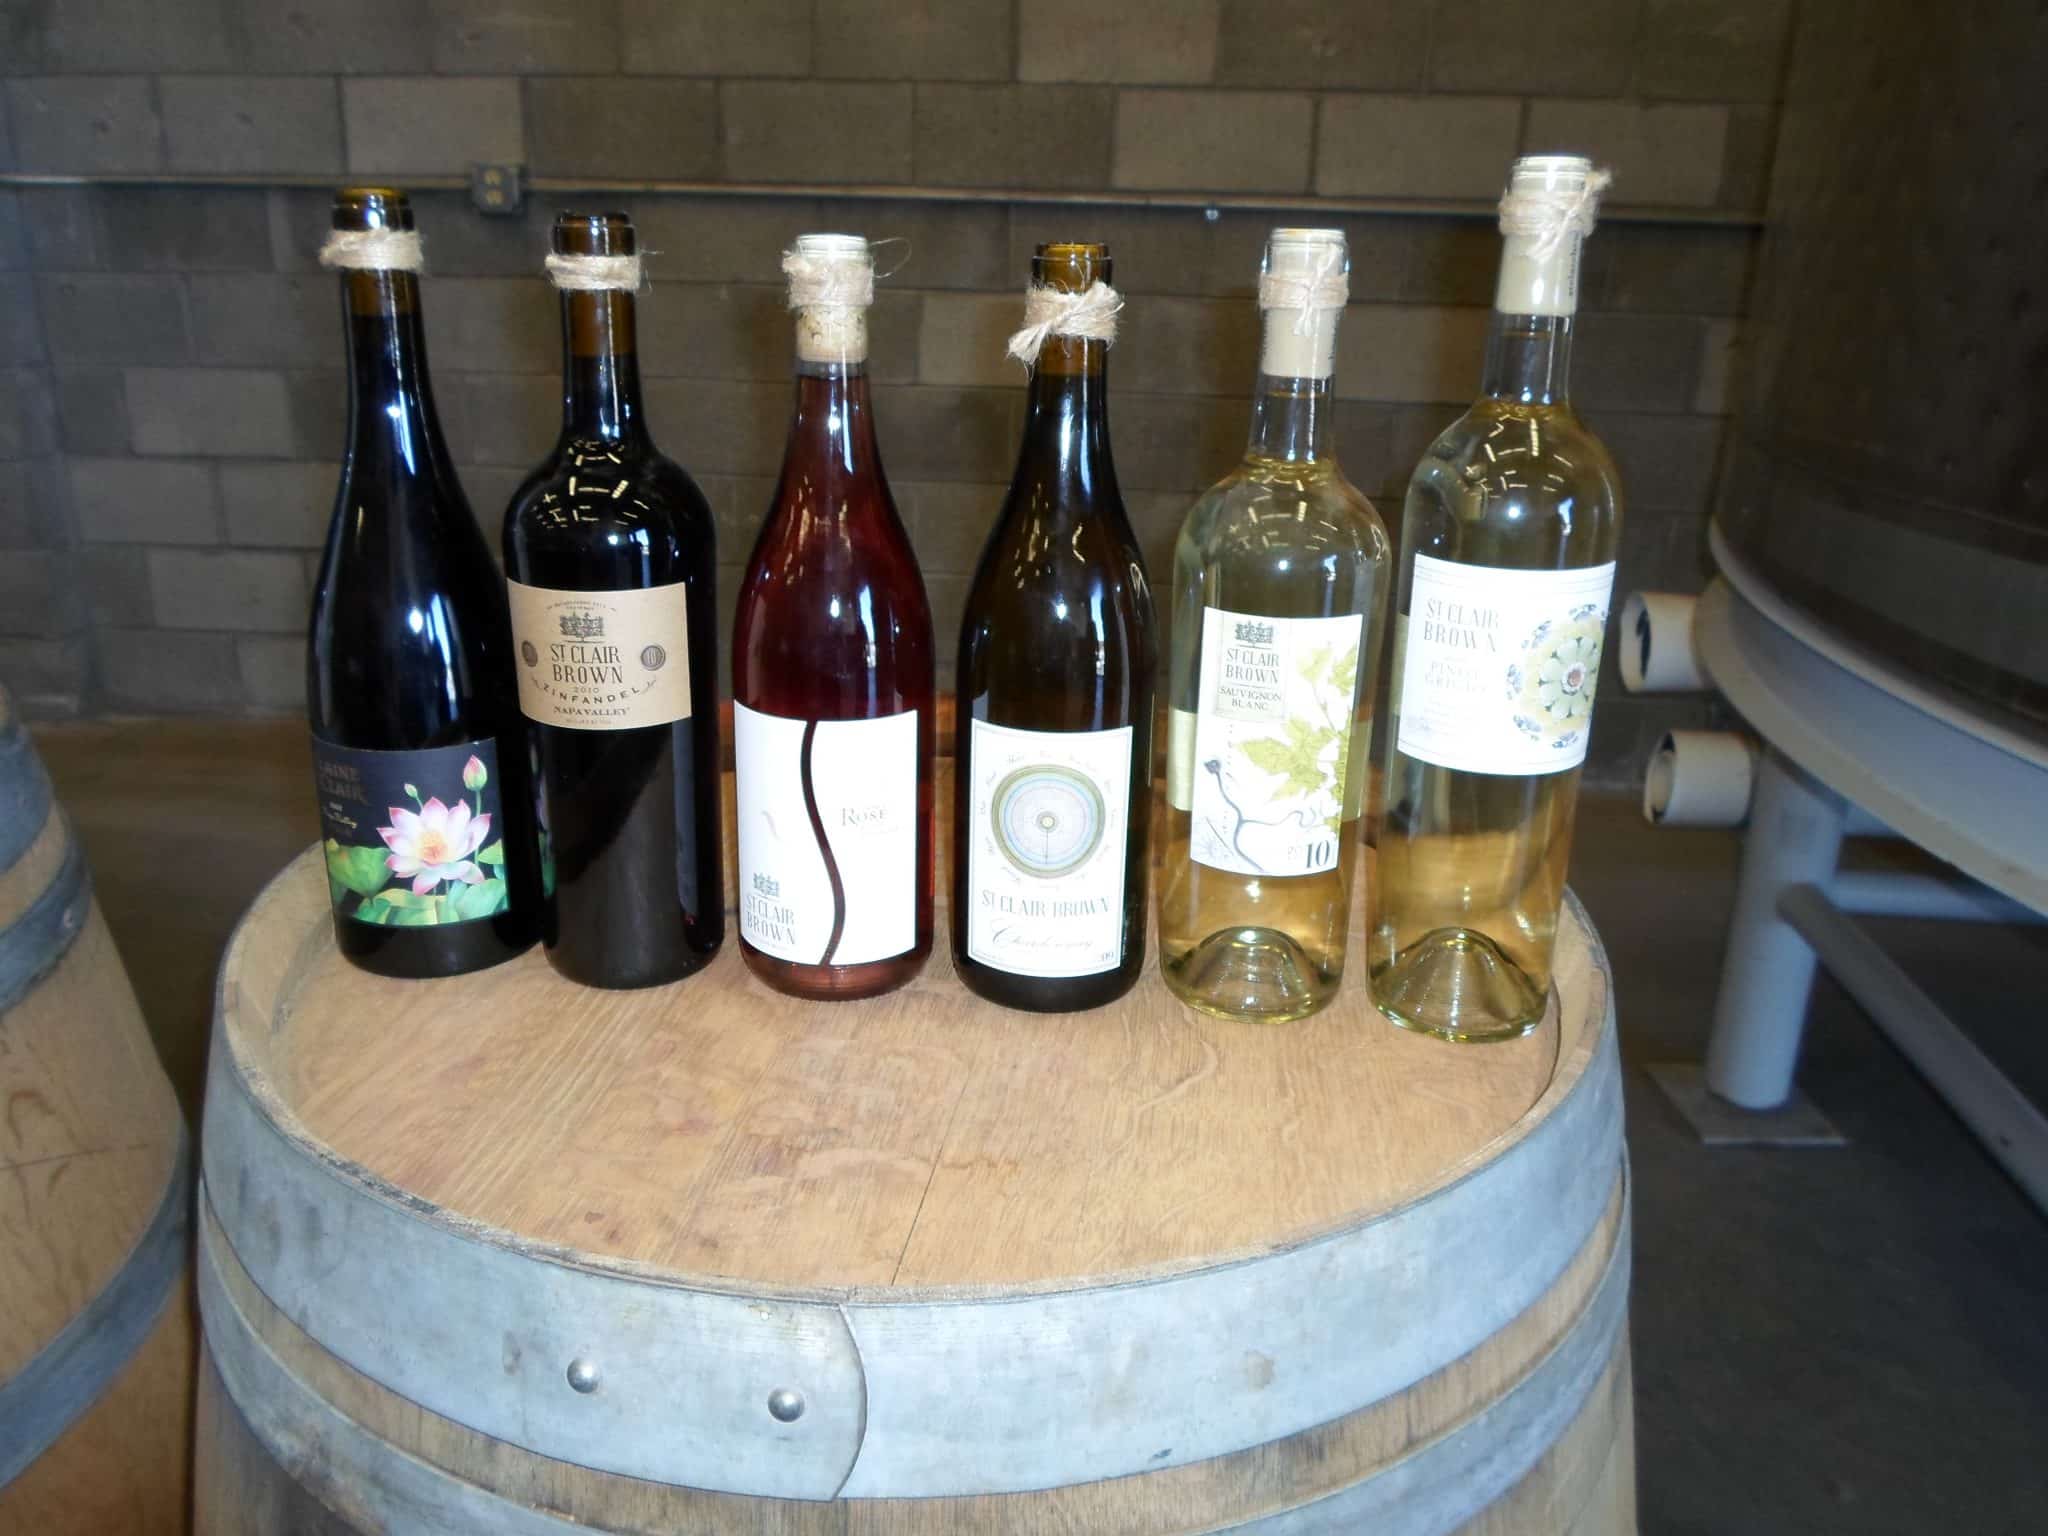 Some of the wonderful wine offerings by St. Clair Brown